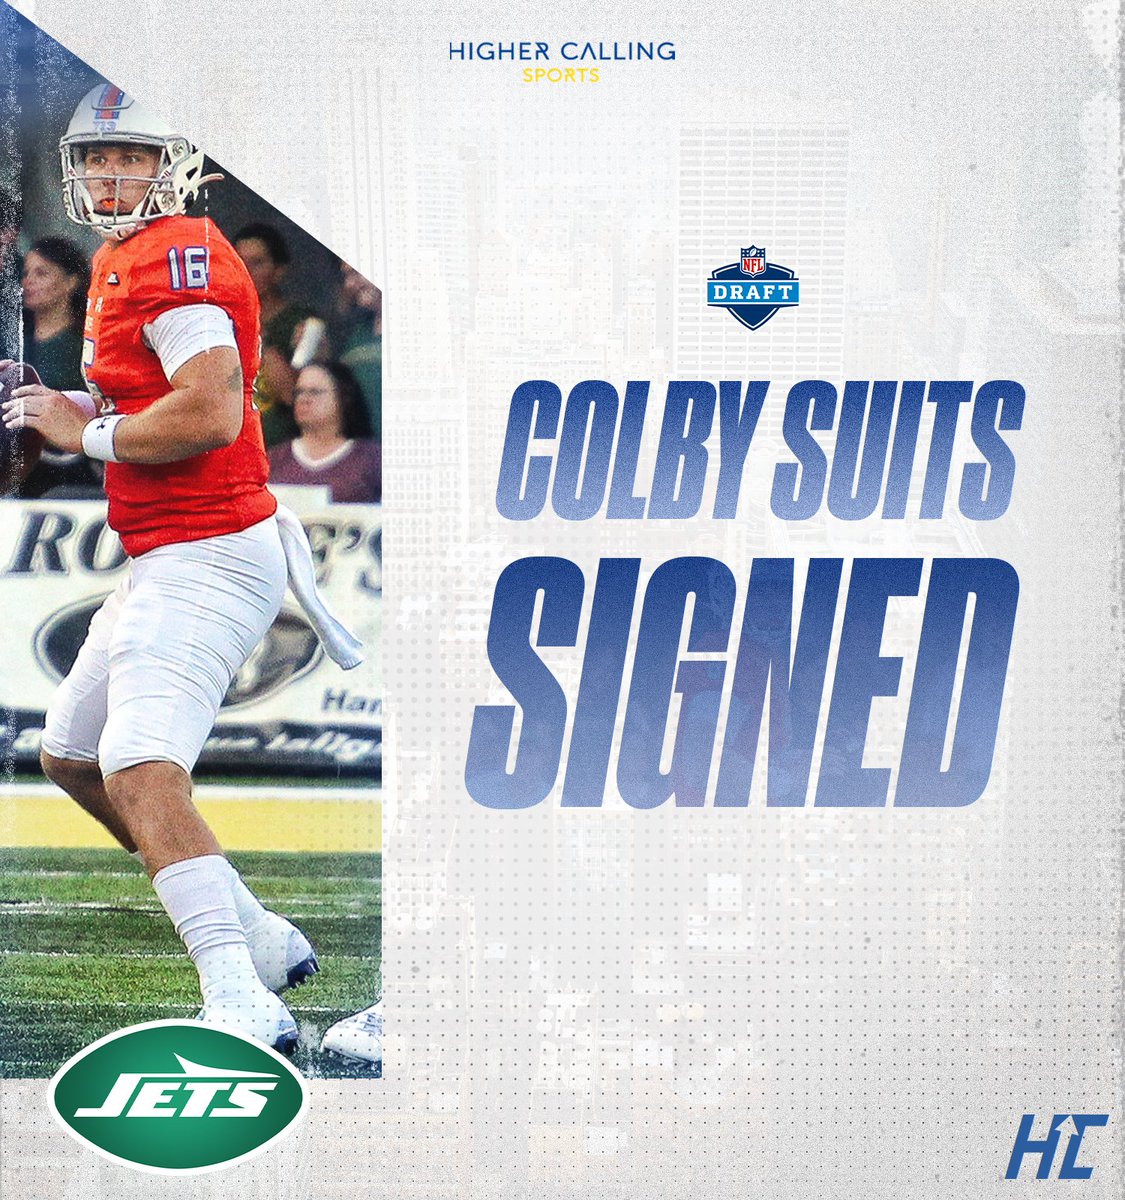 Congrats to @Colby_Suits on signing with the @nyjets! The Jets loved Colby's size, arm, athleticism, and decision-making in mini camp and wanted to make sure he stayed in New Jersey! #HCfamily